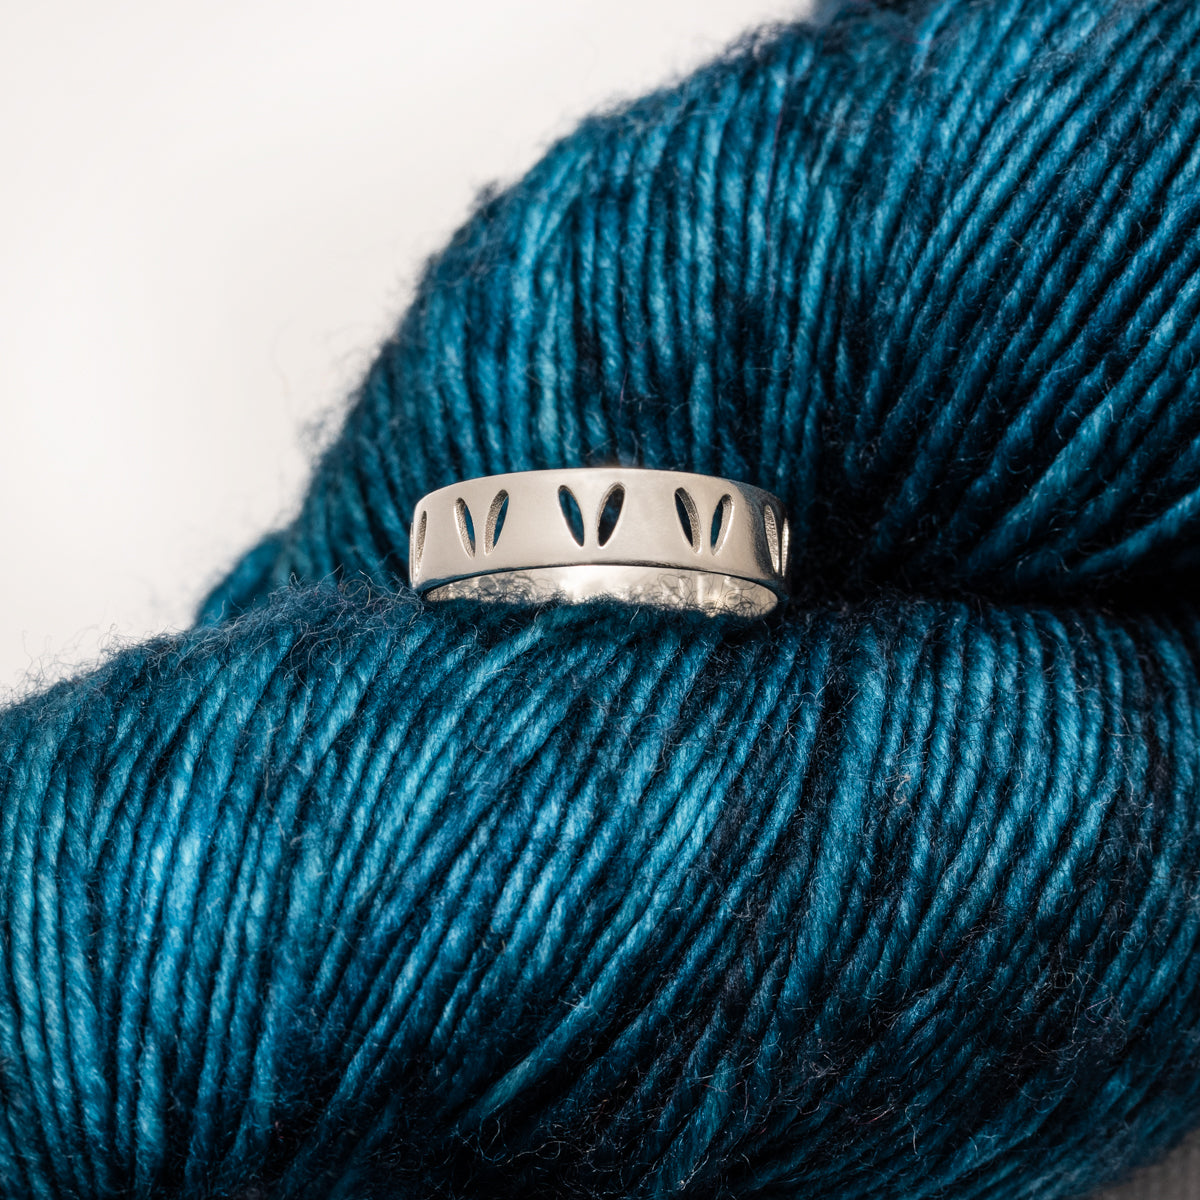 Sterling SilverStockinette Knit "Yarn Life" Ring for Knitters